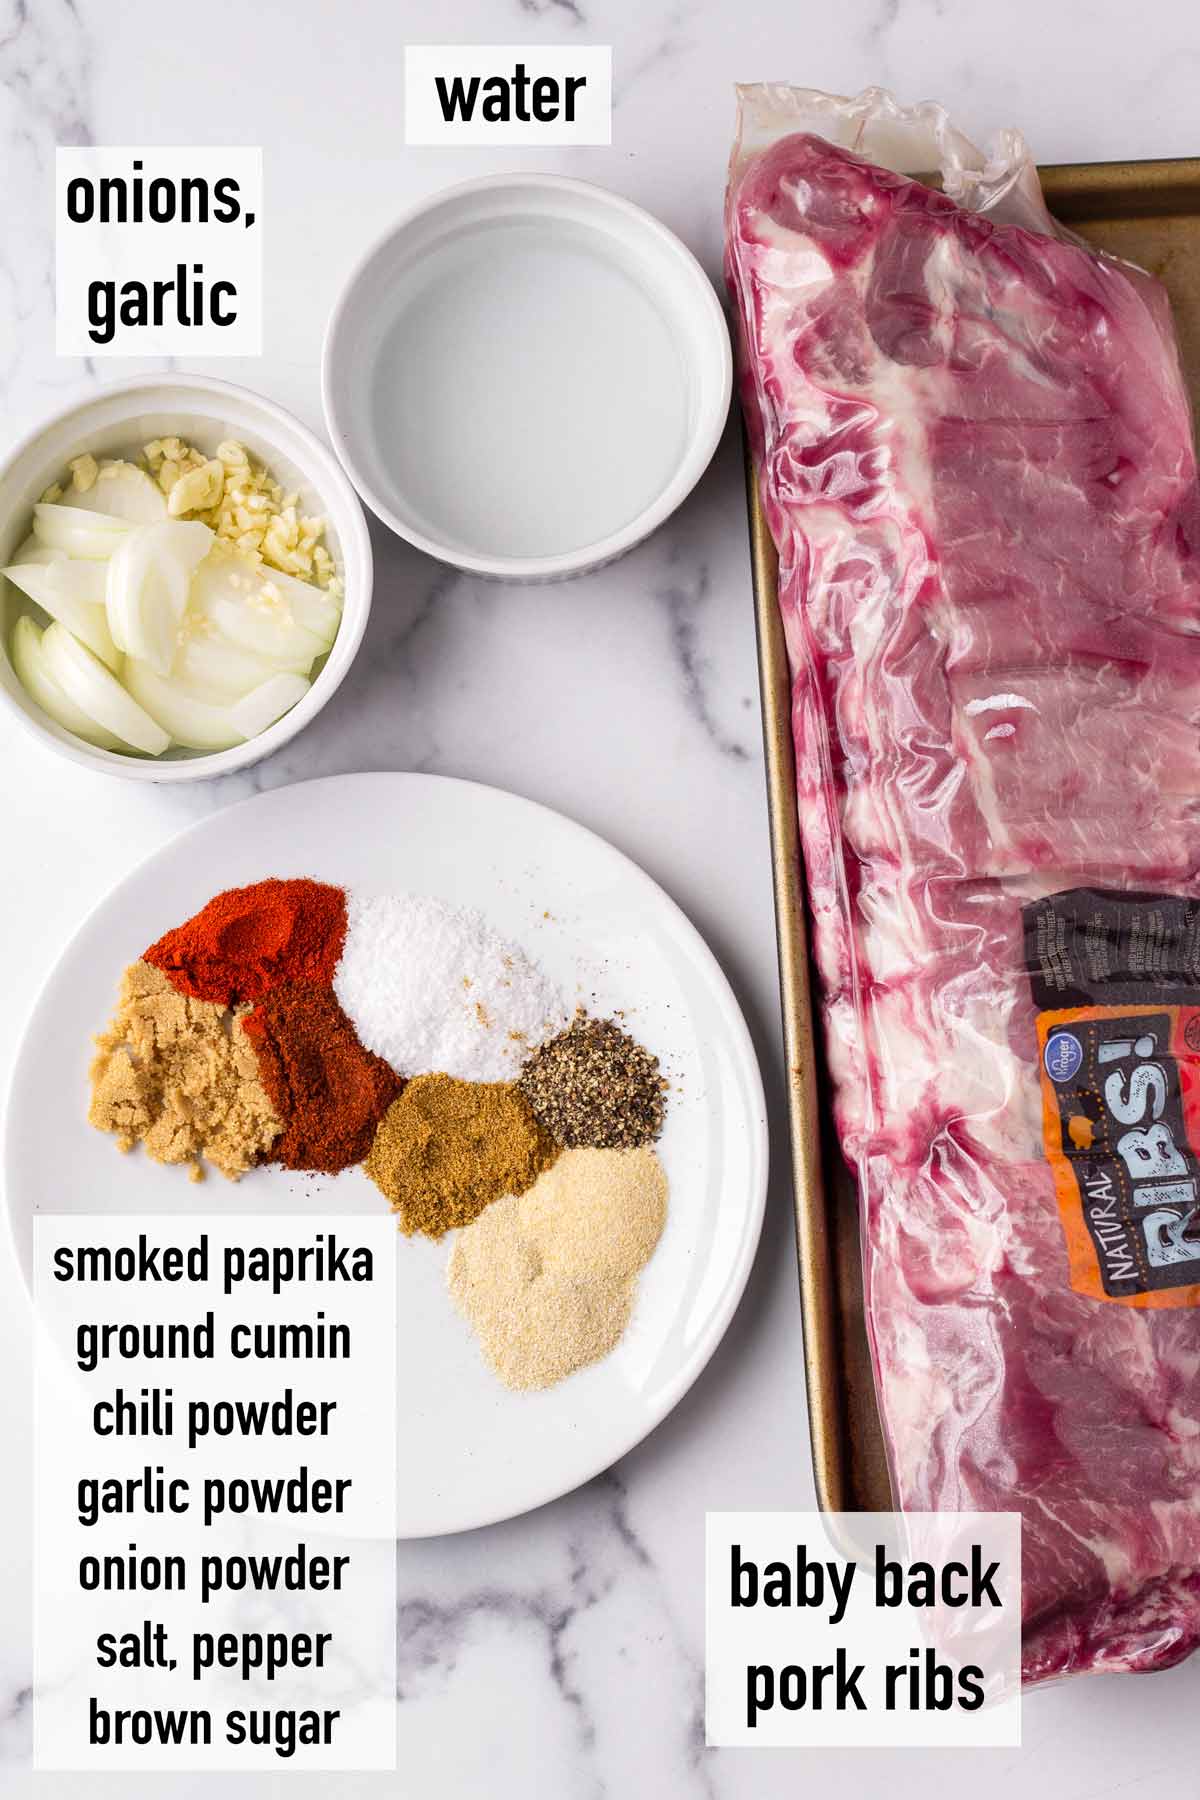 labeled ingredients to make slow cooked BBQ ribs